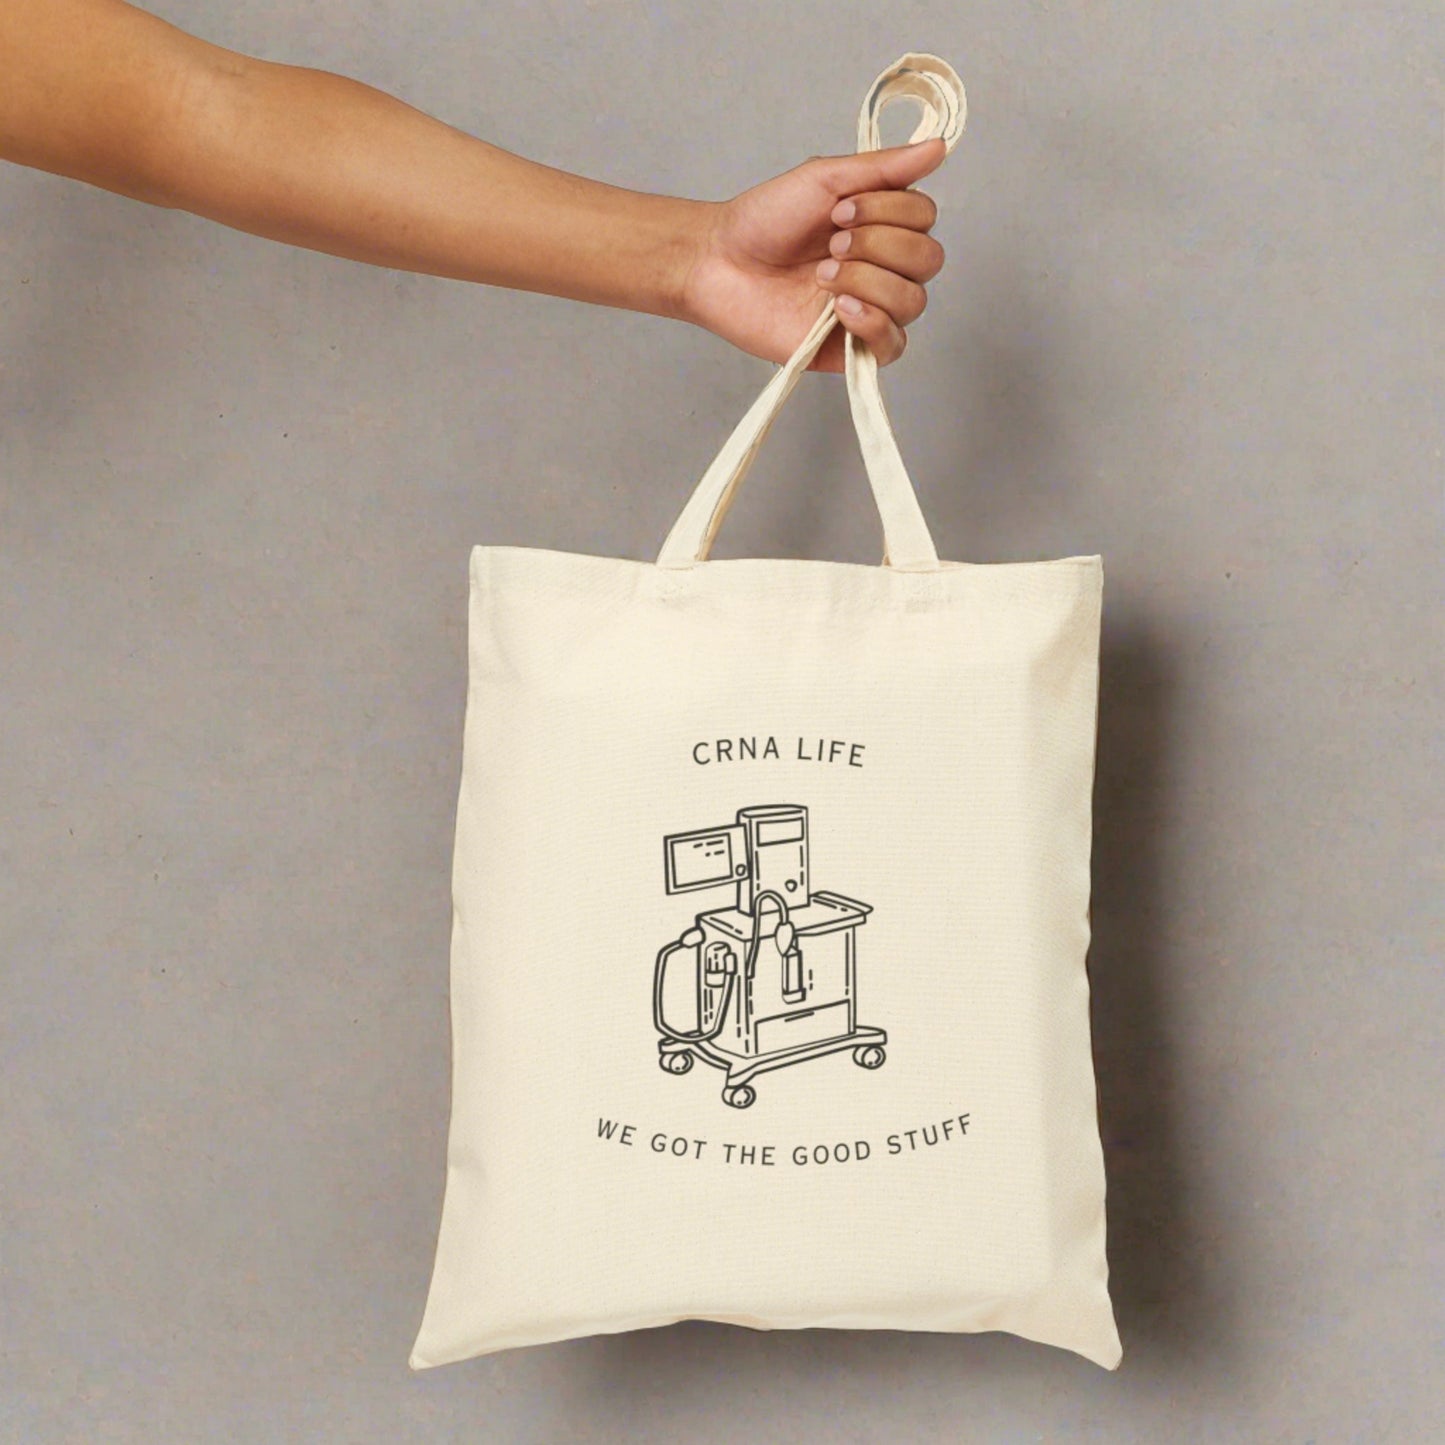 CRNA tote bag, cute gift for new grad nurse anesthetist, anesthesia student, the good stuff, coworker gift, new grad nurse